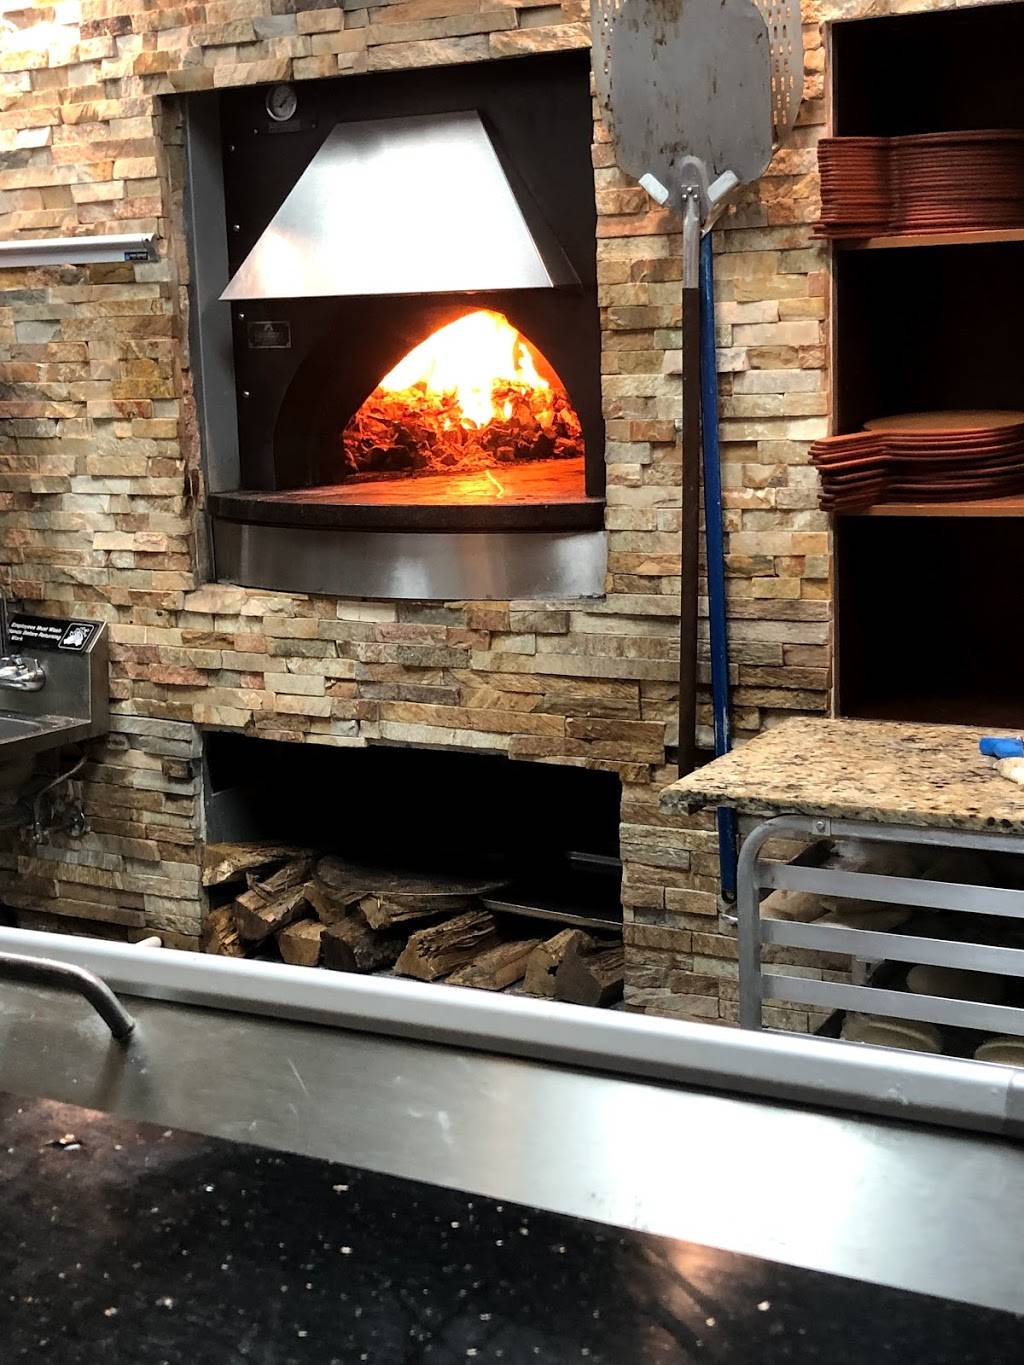 Tommy Gs Coal Fired Pizza | 901 Convention Center Blvd #115, New Orleans, LA 70130 | Phone: (504) 358-2006